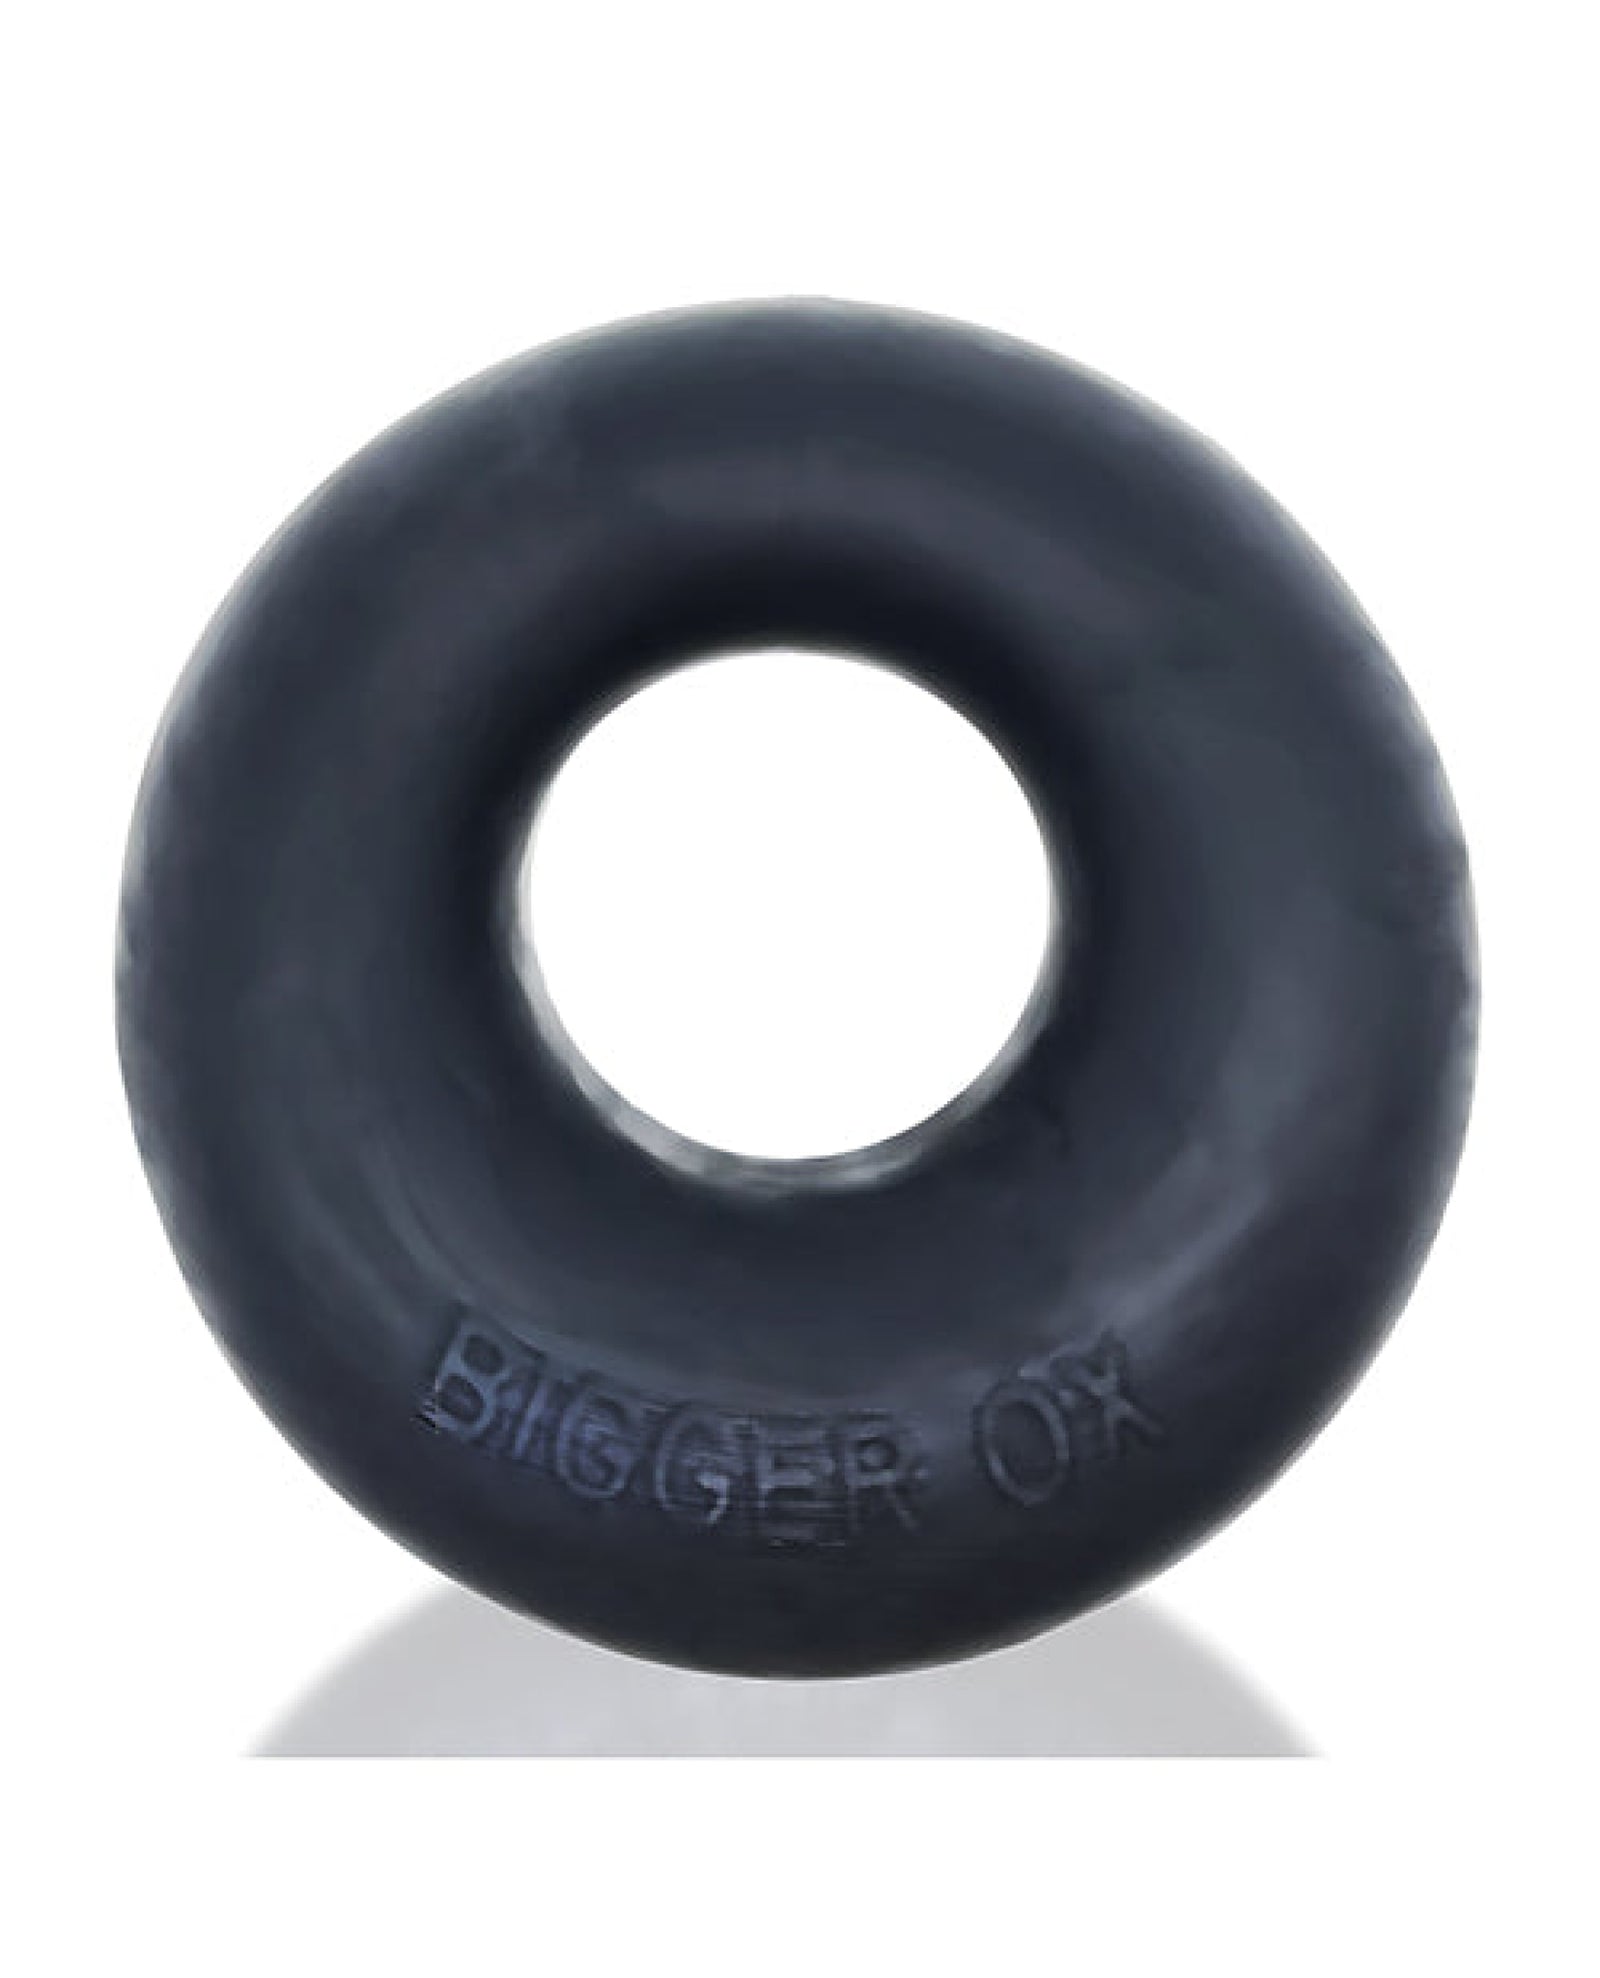 Oxballs Bigger Ox Cockring - Ice Hunky Junk